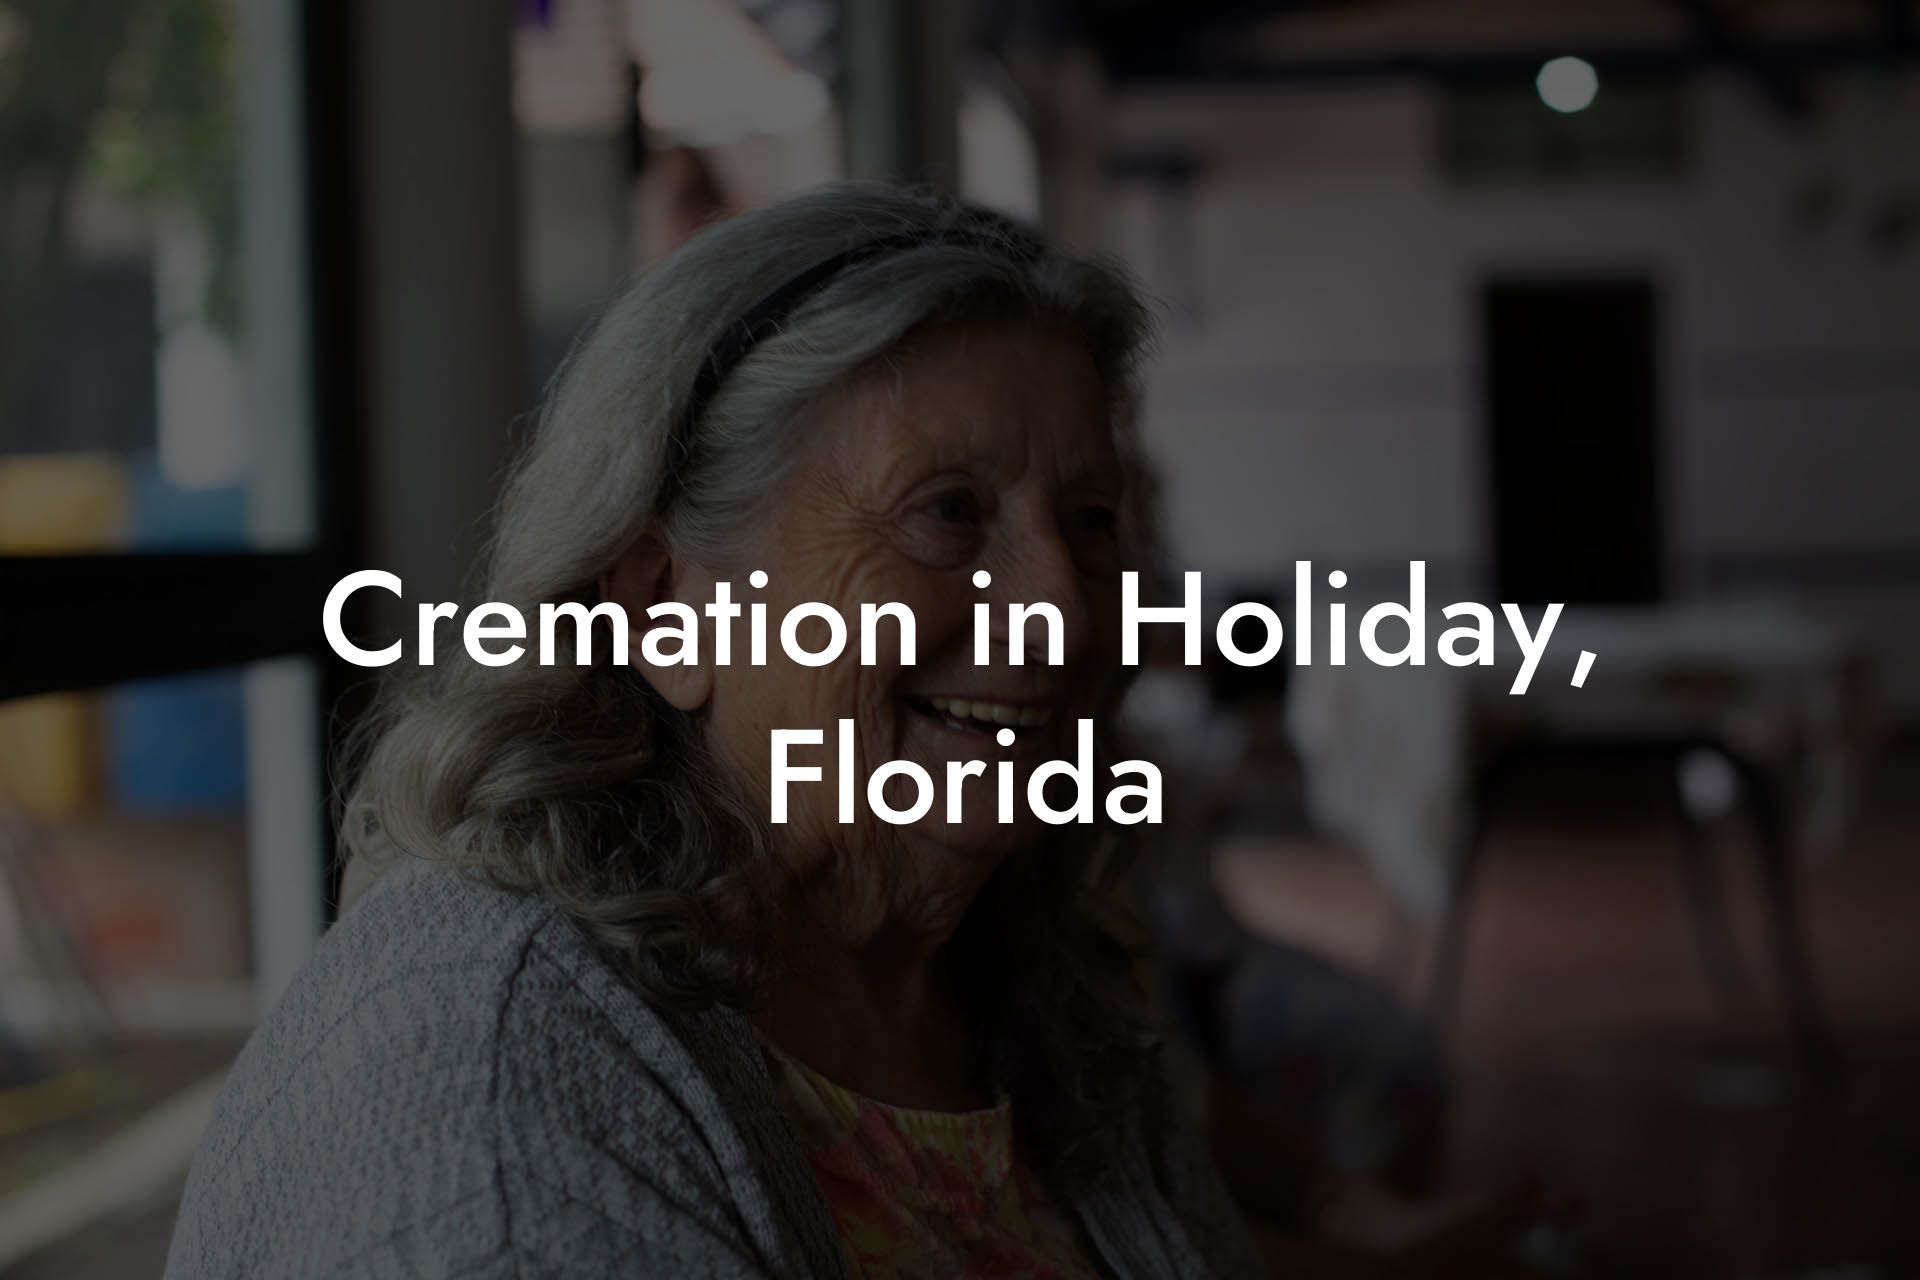 Cremation in Holiday, Florida